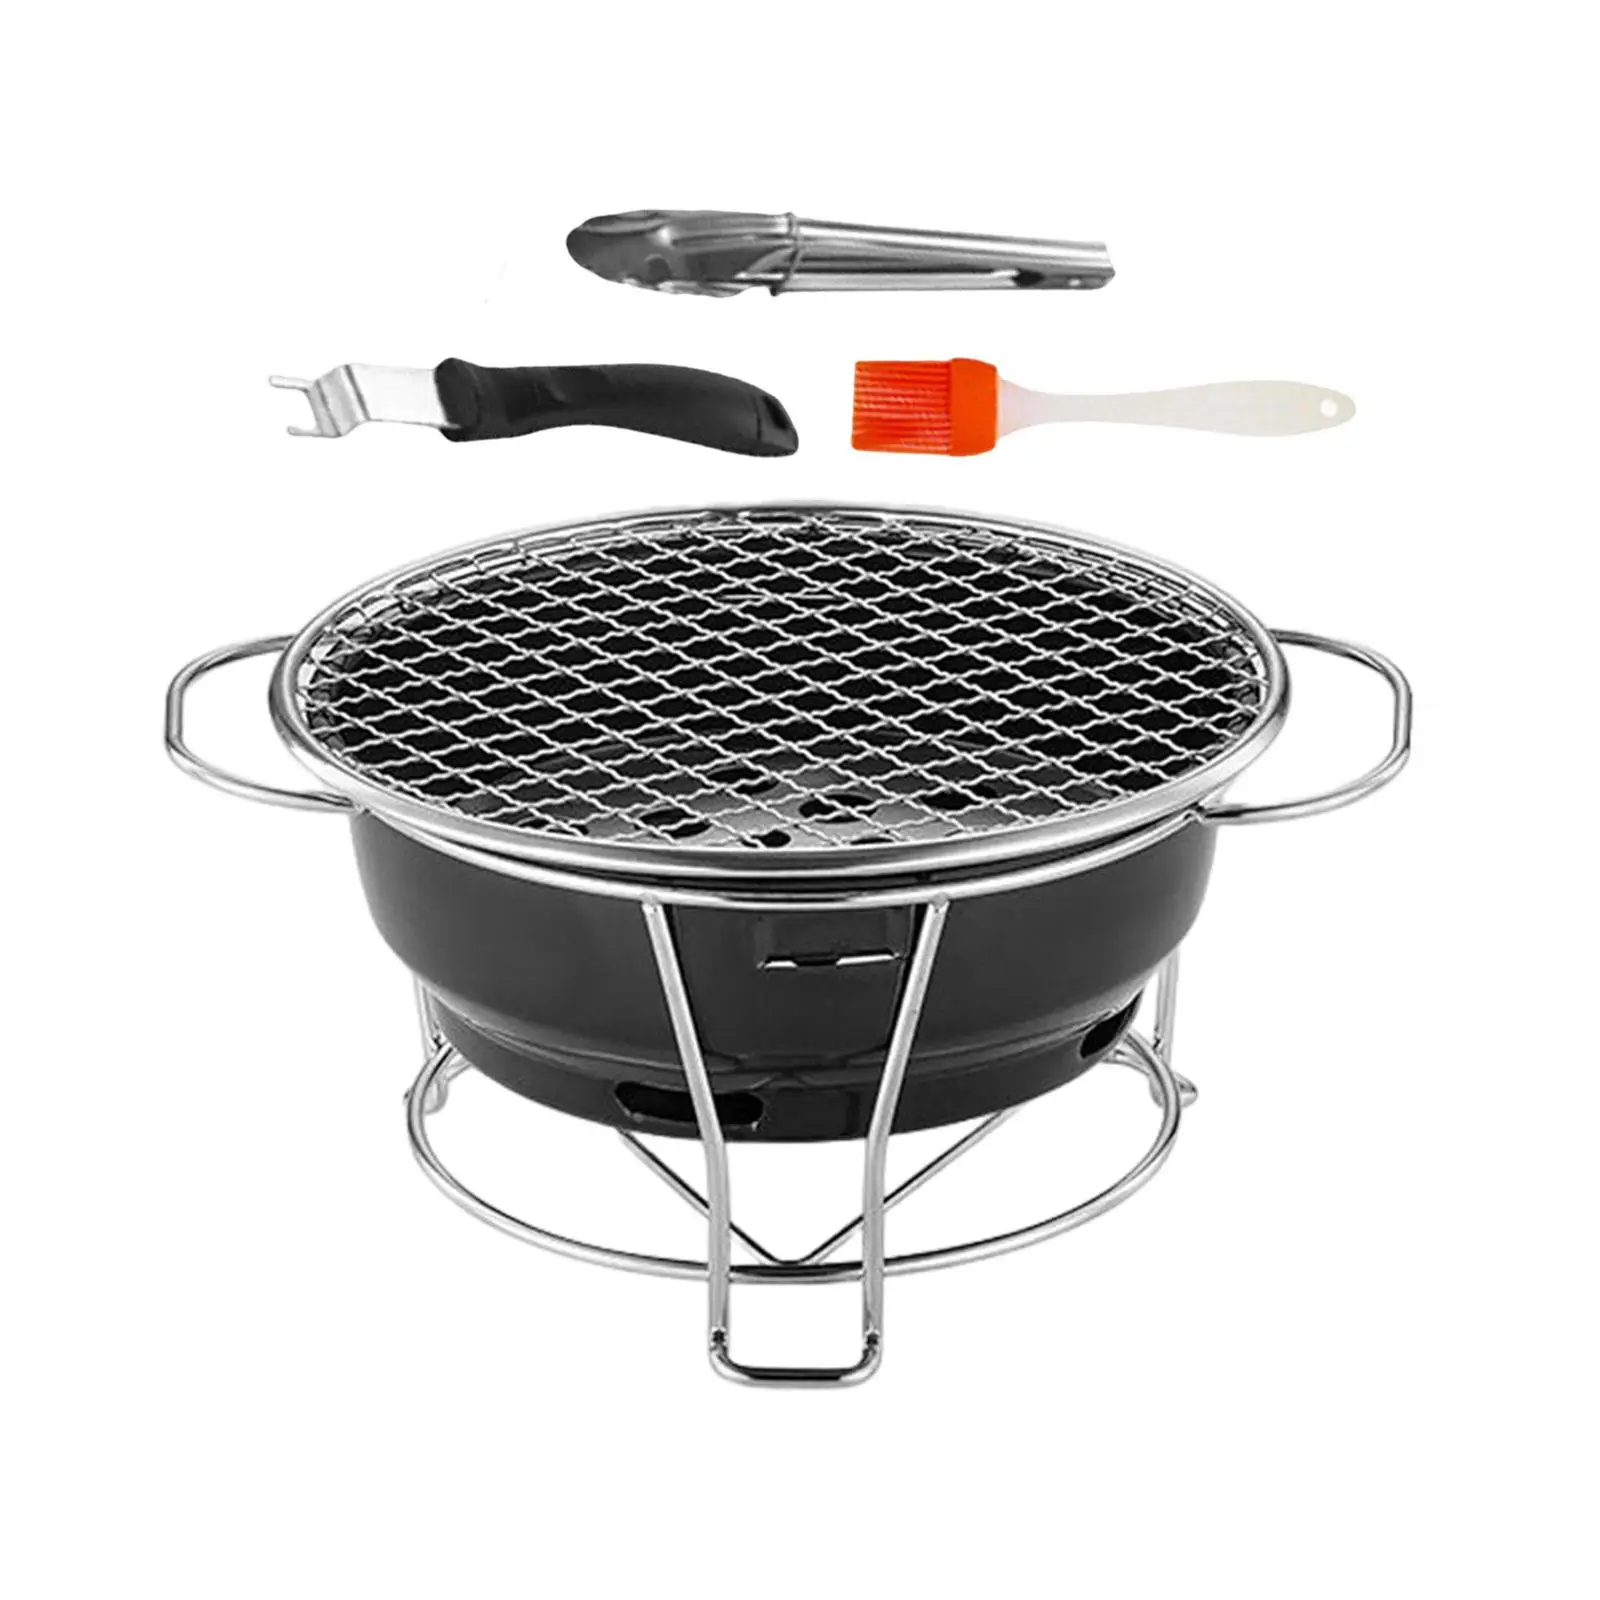 Barbecue Grill Camping Grilling Meat Steak for Outdoor Backpacking